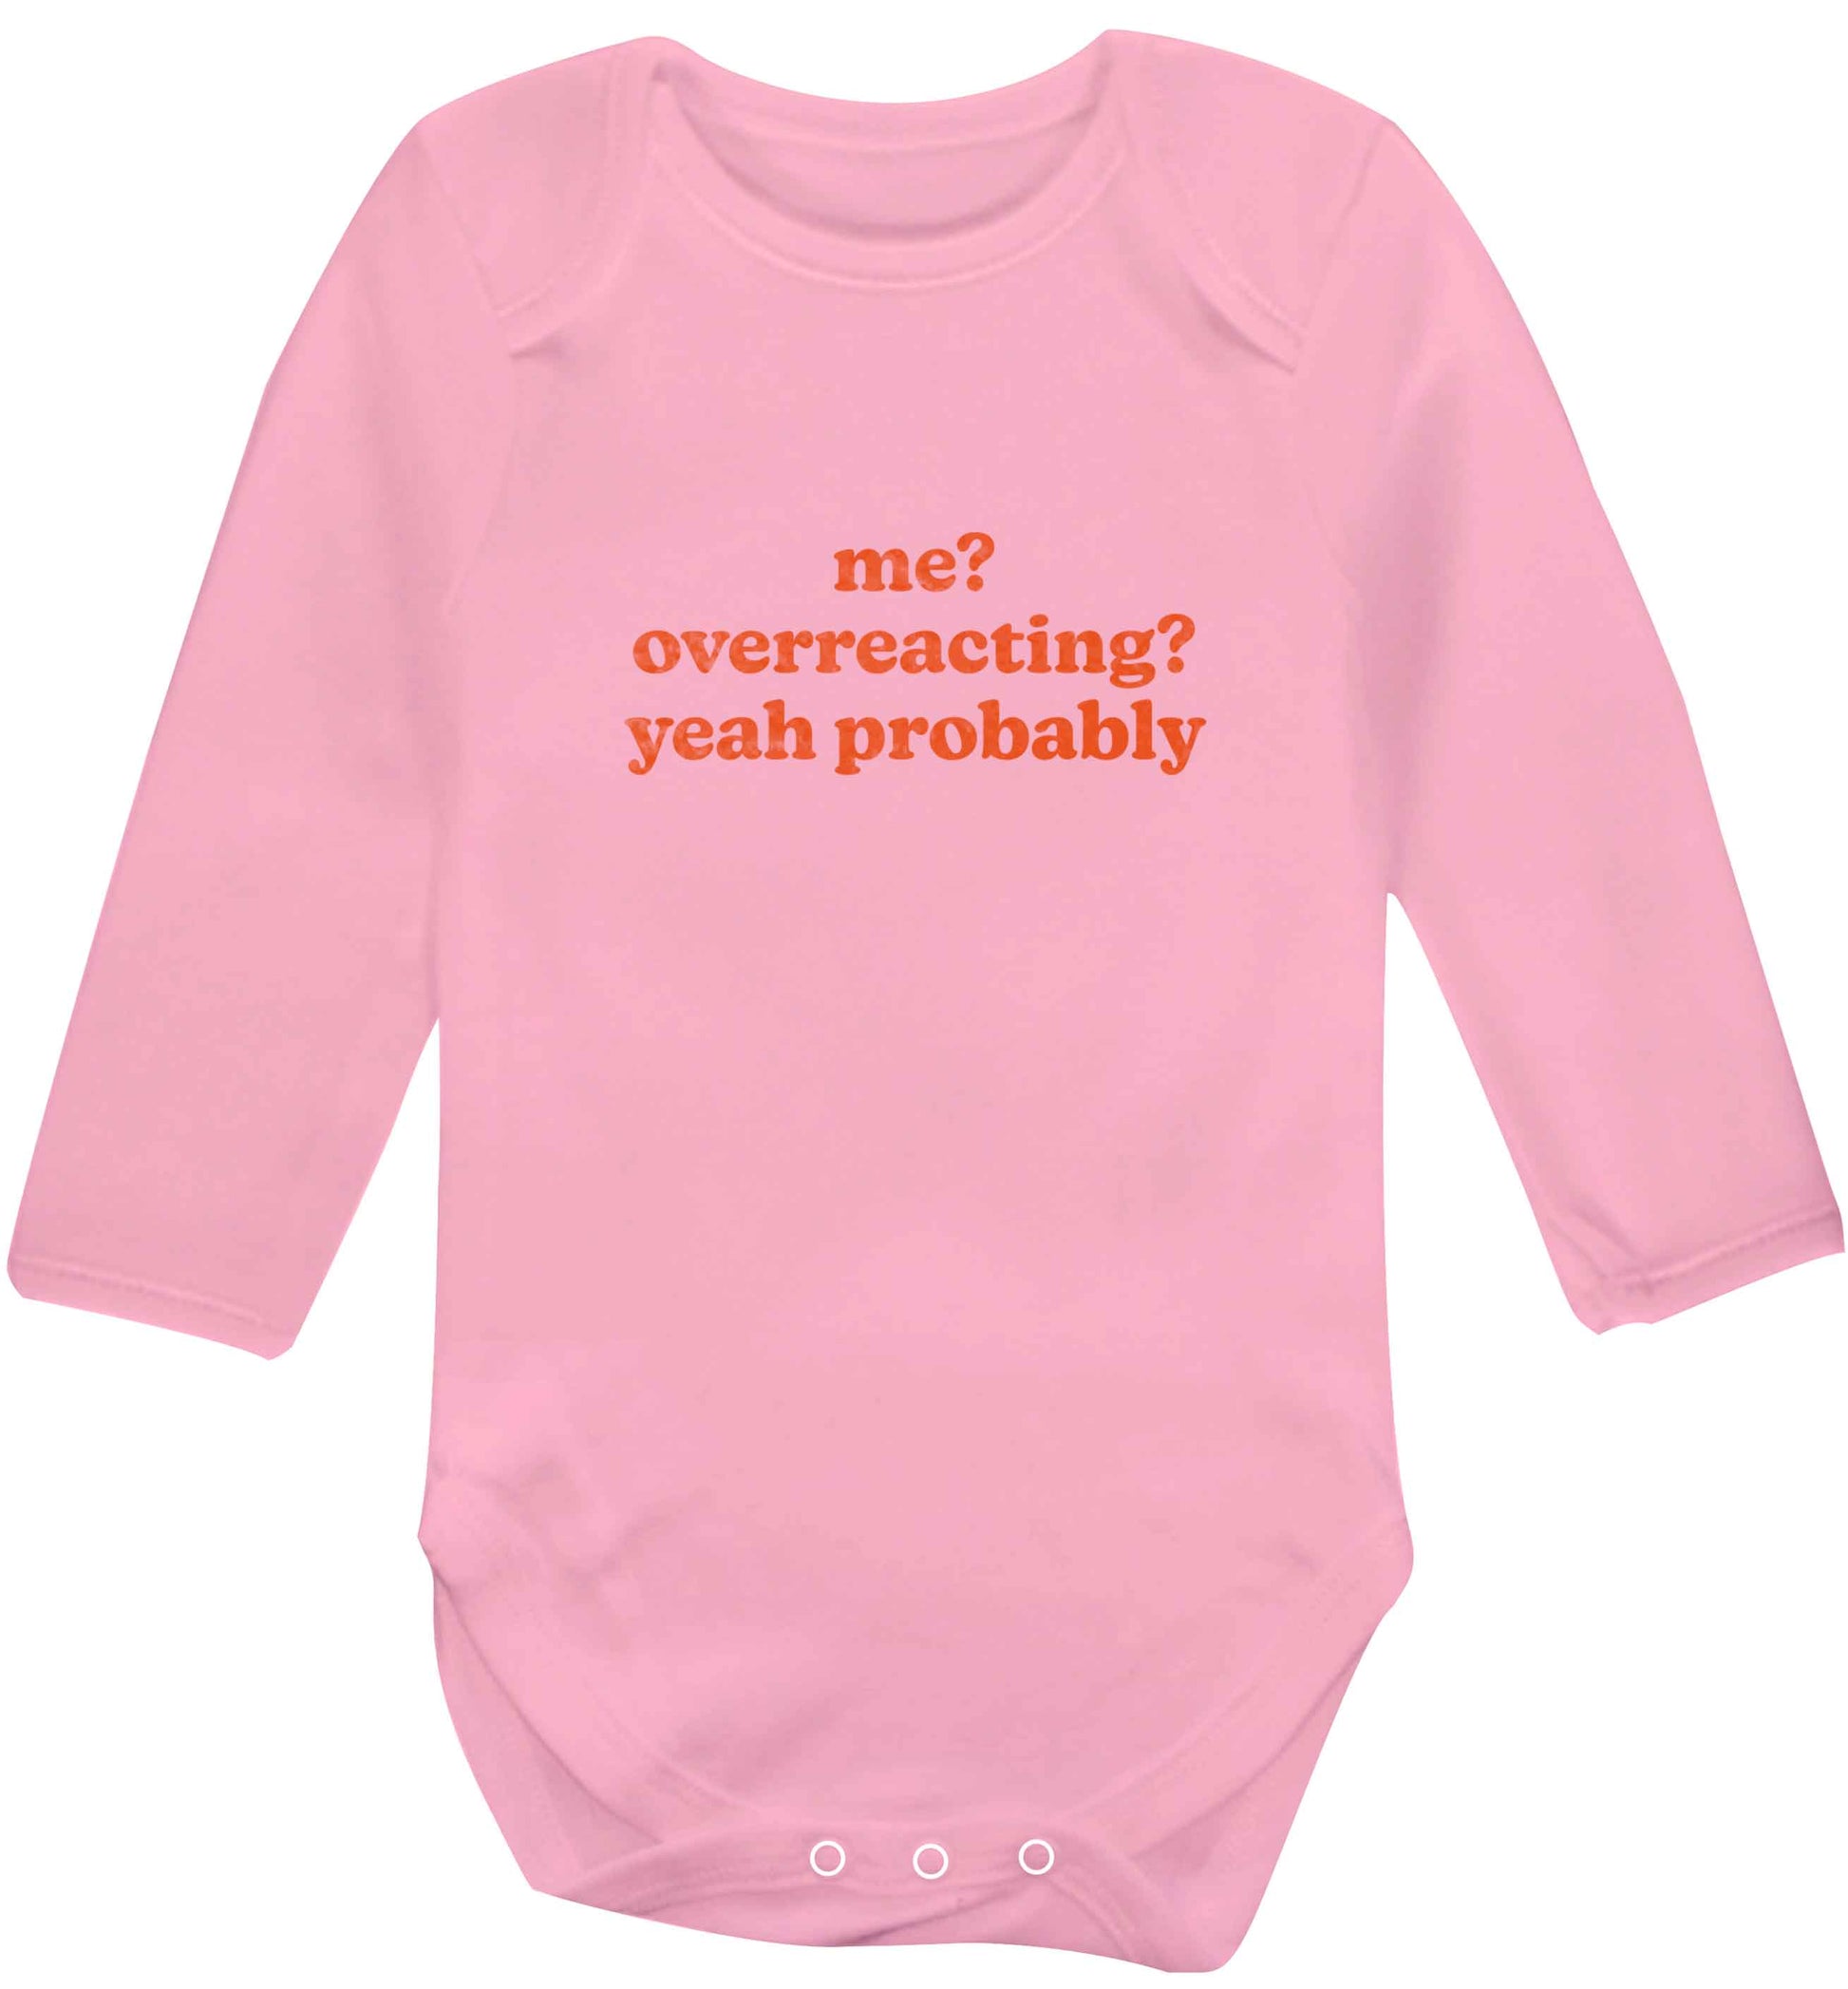 Me? Overreacting? Yeah probably baby vest long sleeved pale pink 6-12 months